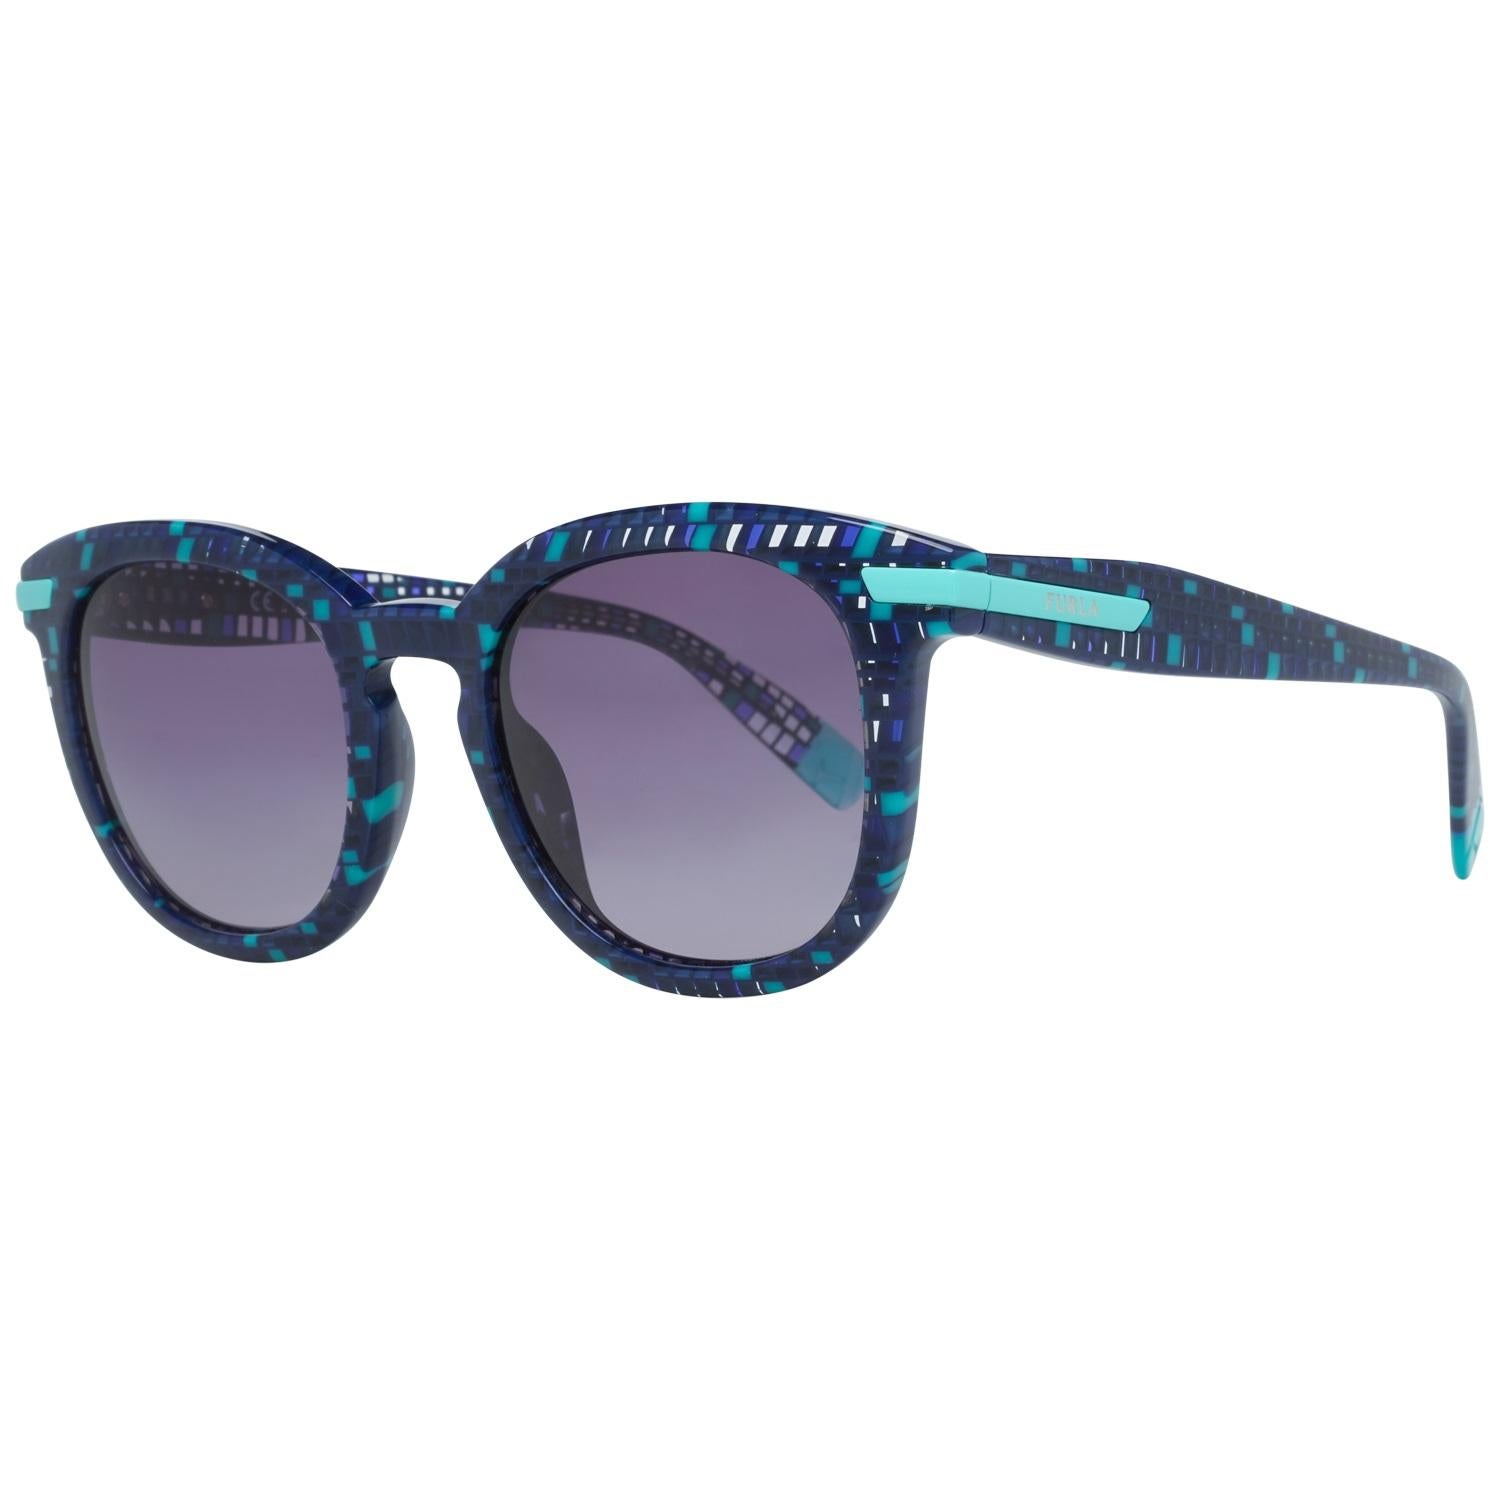 Furla Mint Women Blue Sunglasses SFU036 0GB2 49/22 140 mm. Gradient Blue lenses. Imported

Details

MATERIAL: Acetate

COLOR: Blue

MODEL: SFU036 0GB2

GENDER: Women

COUNTRY OF MANUFACTURE: China

ORIGINAL CASE?: Yes

STYLE: Butterfly

LENS COLOR: